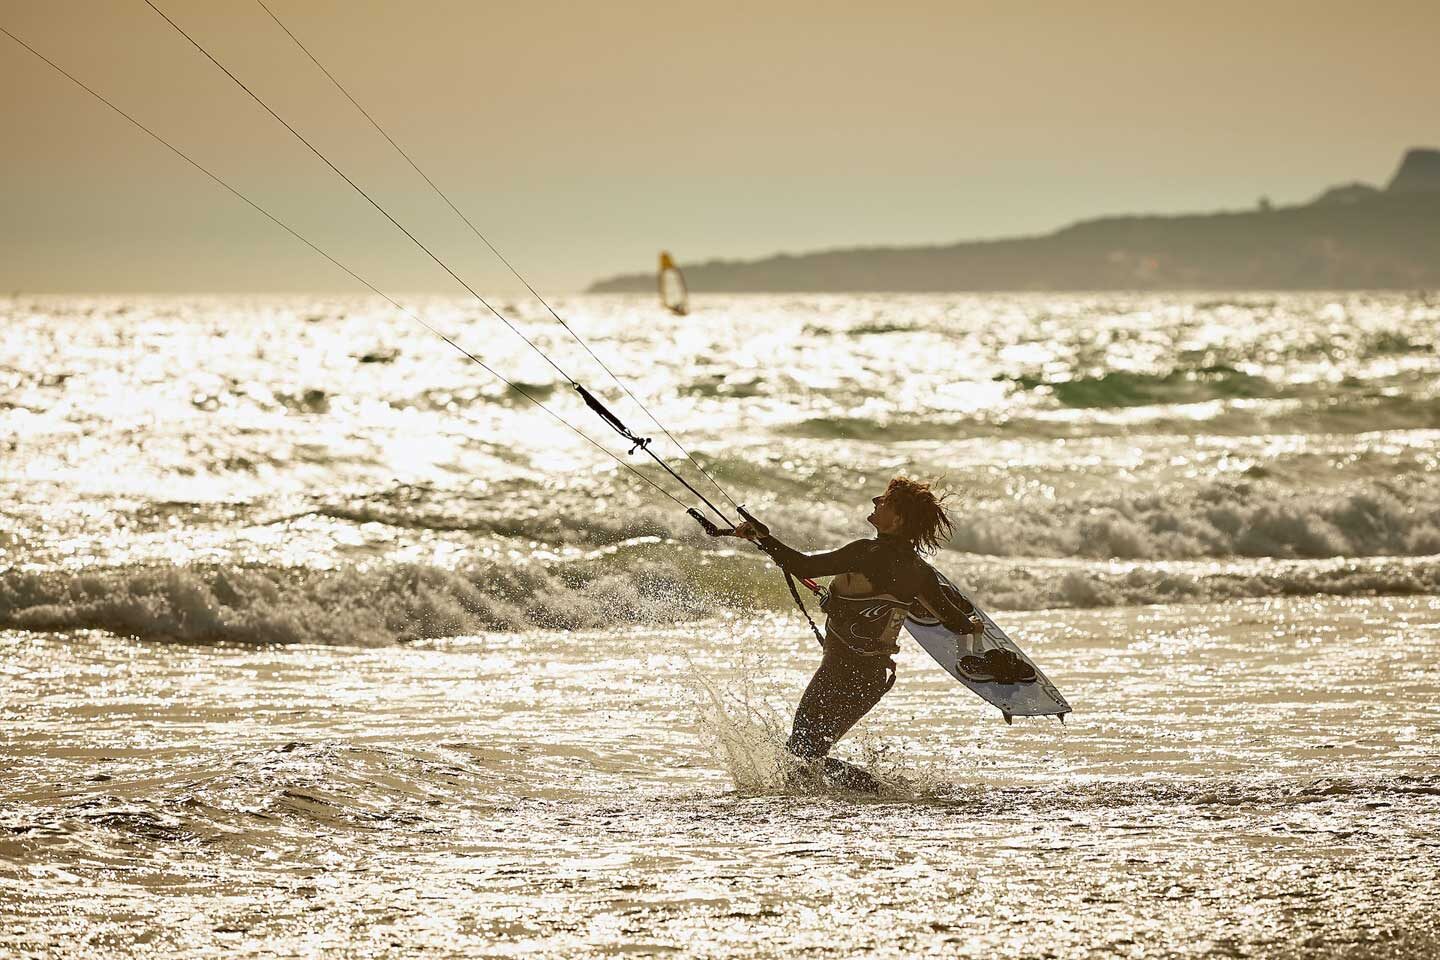 Kite surfing from the sea in Spain